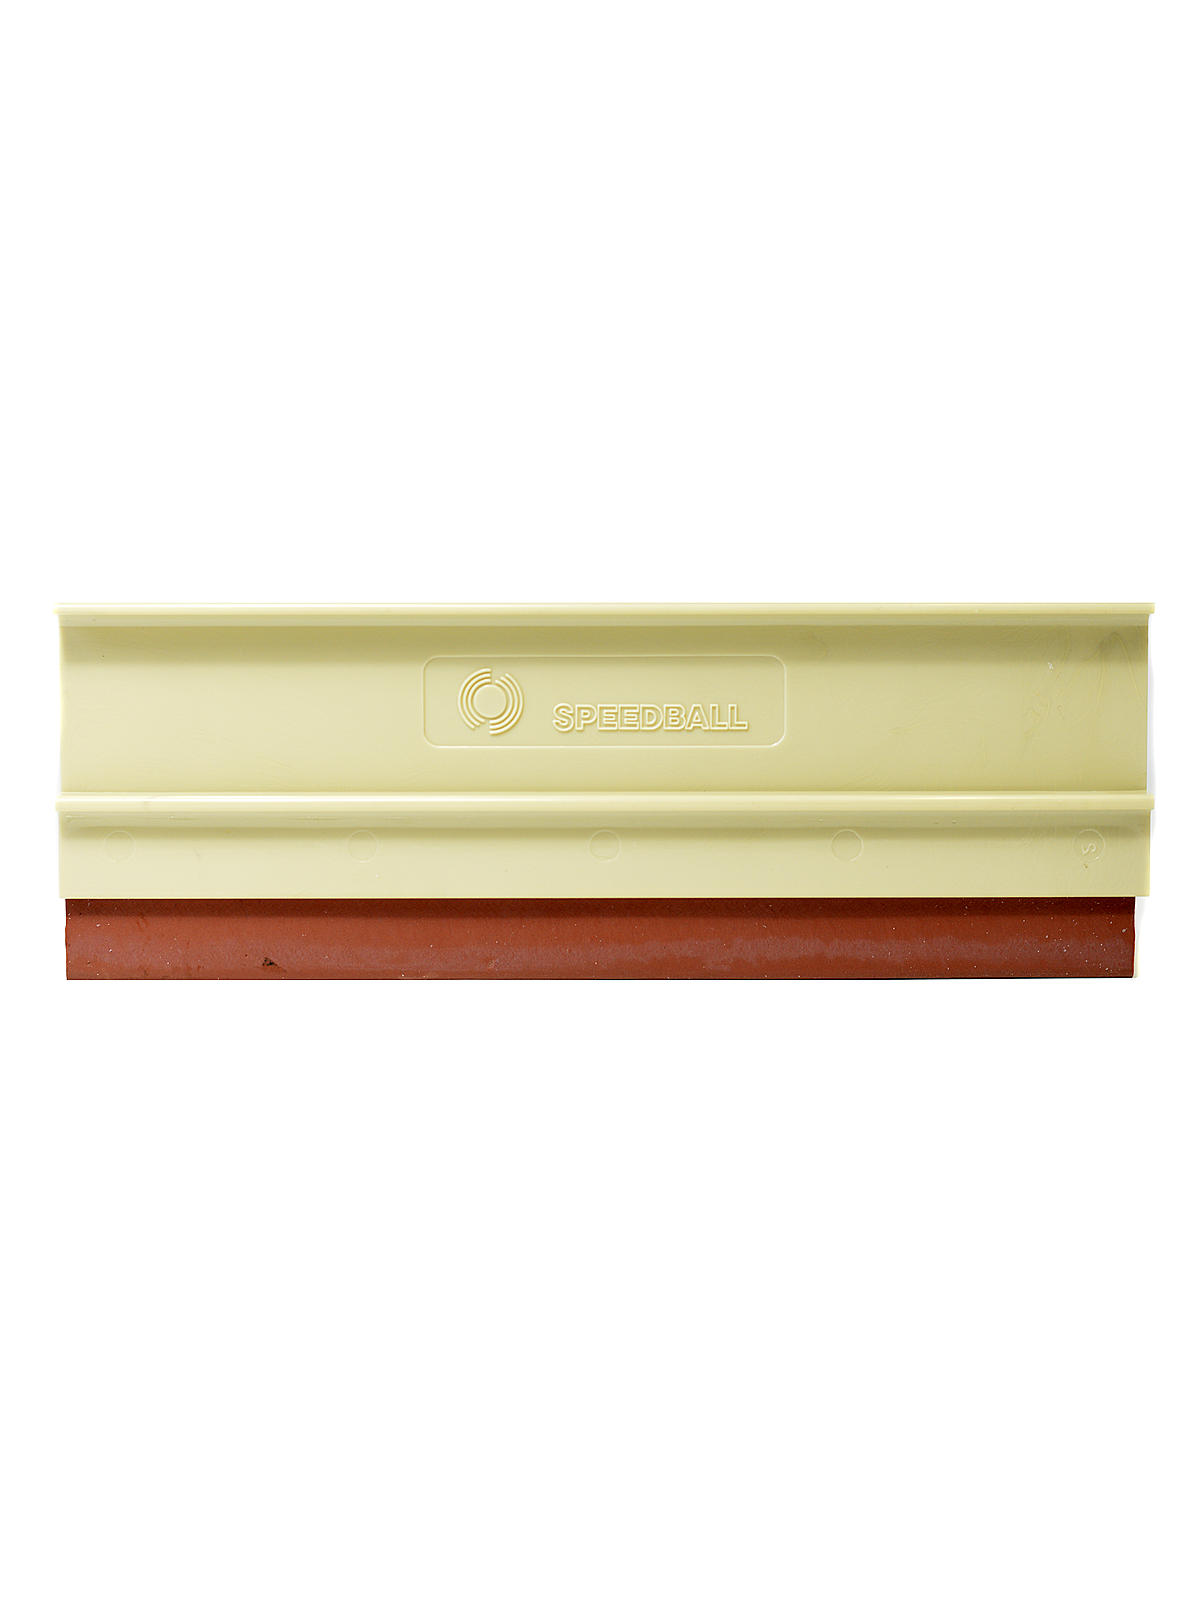 Fabric Squeegee 9 In.